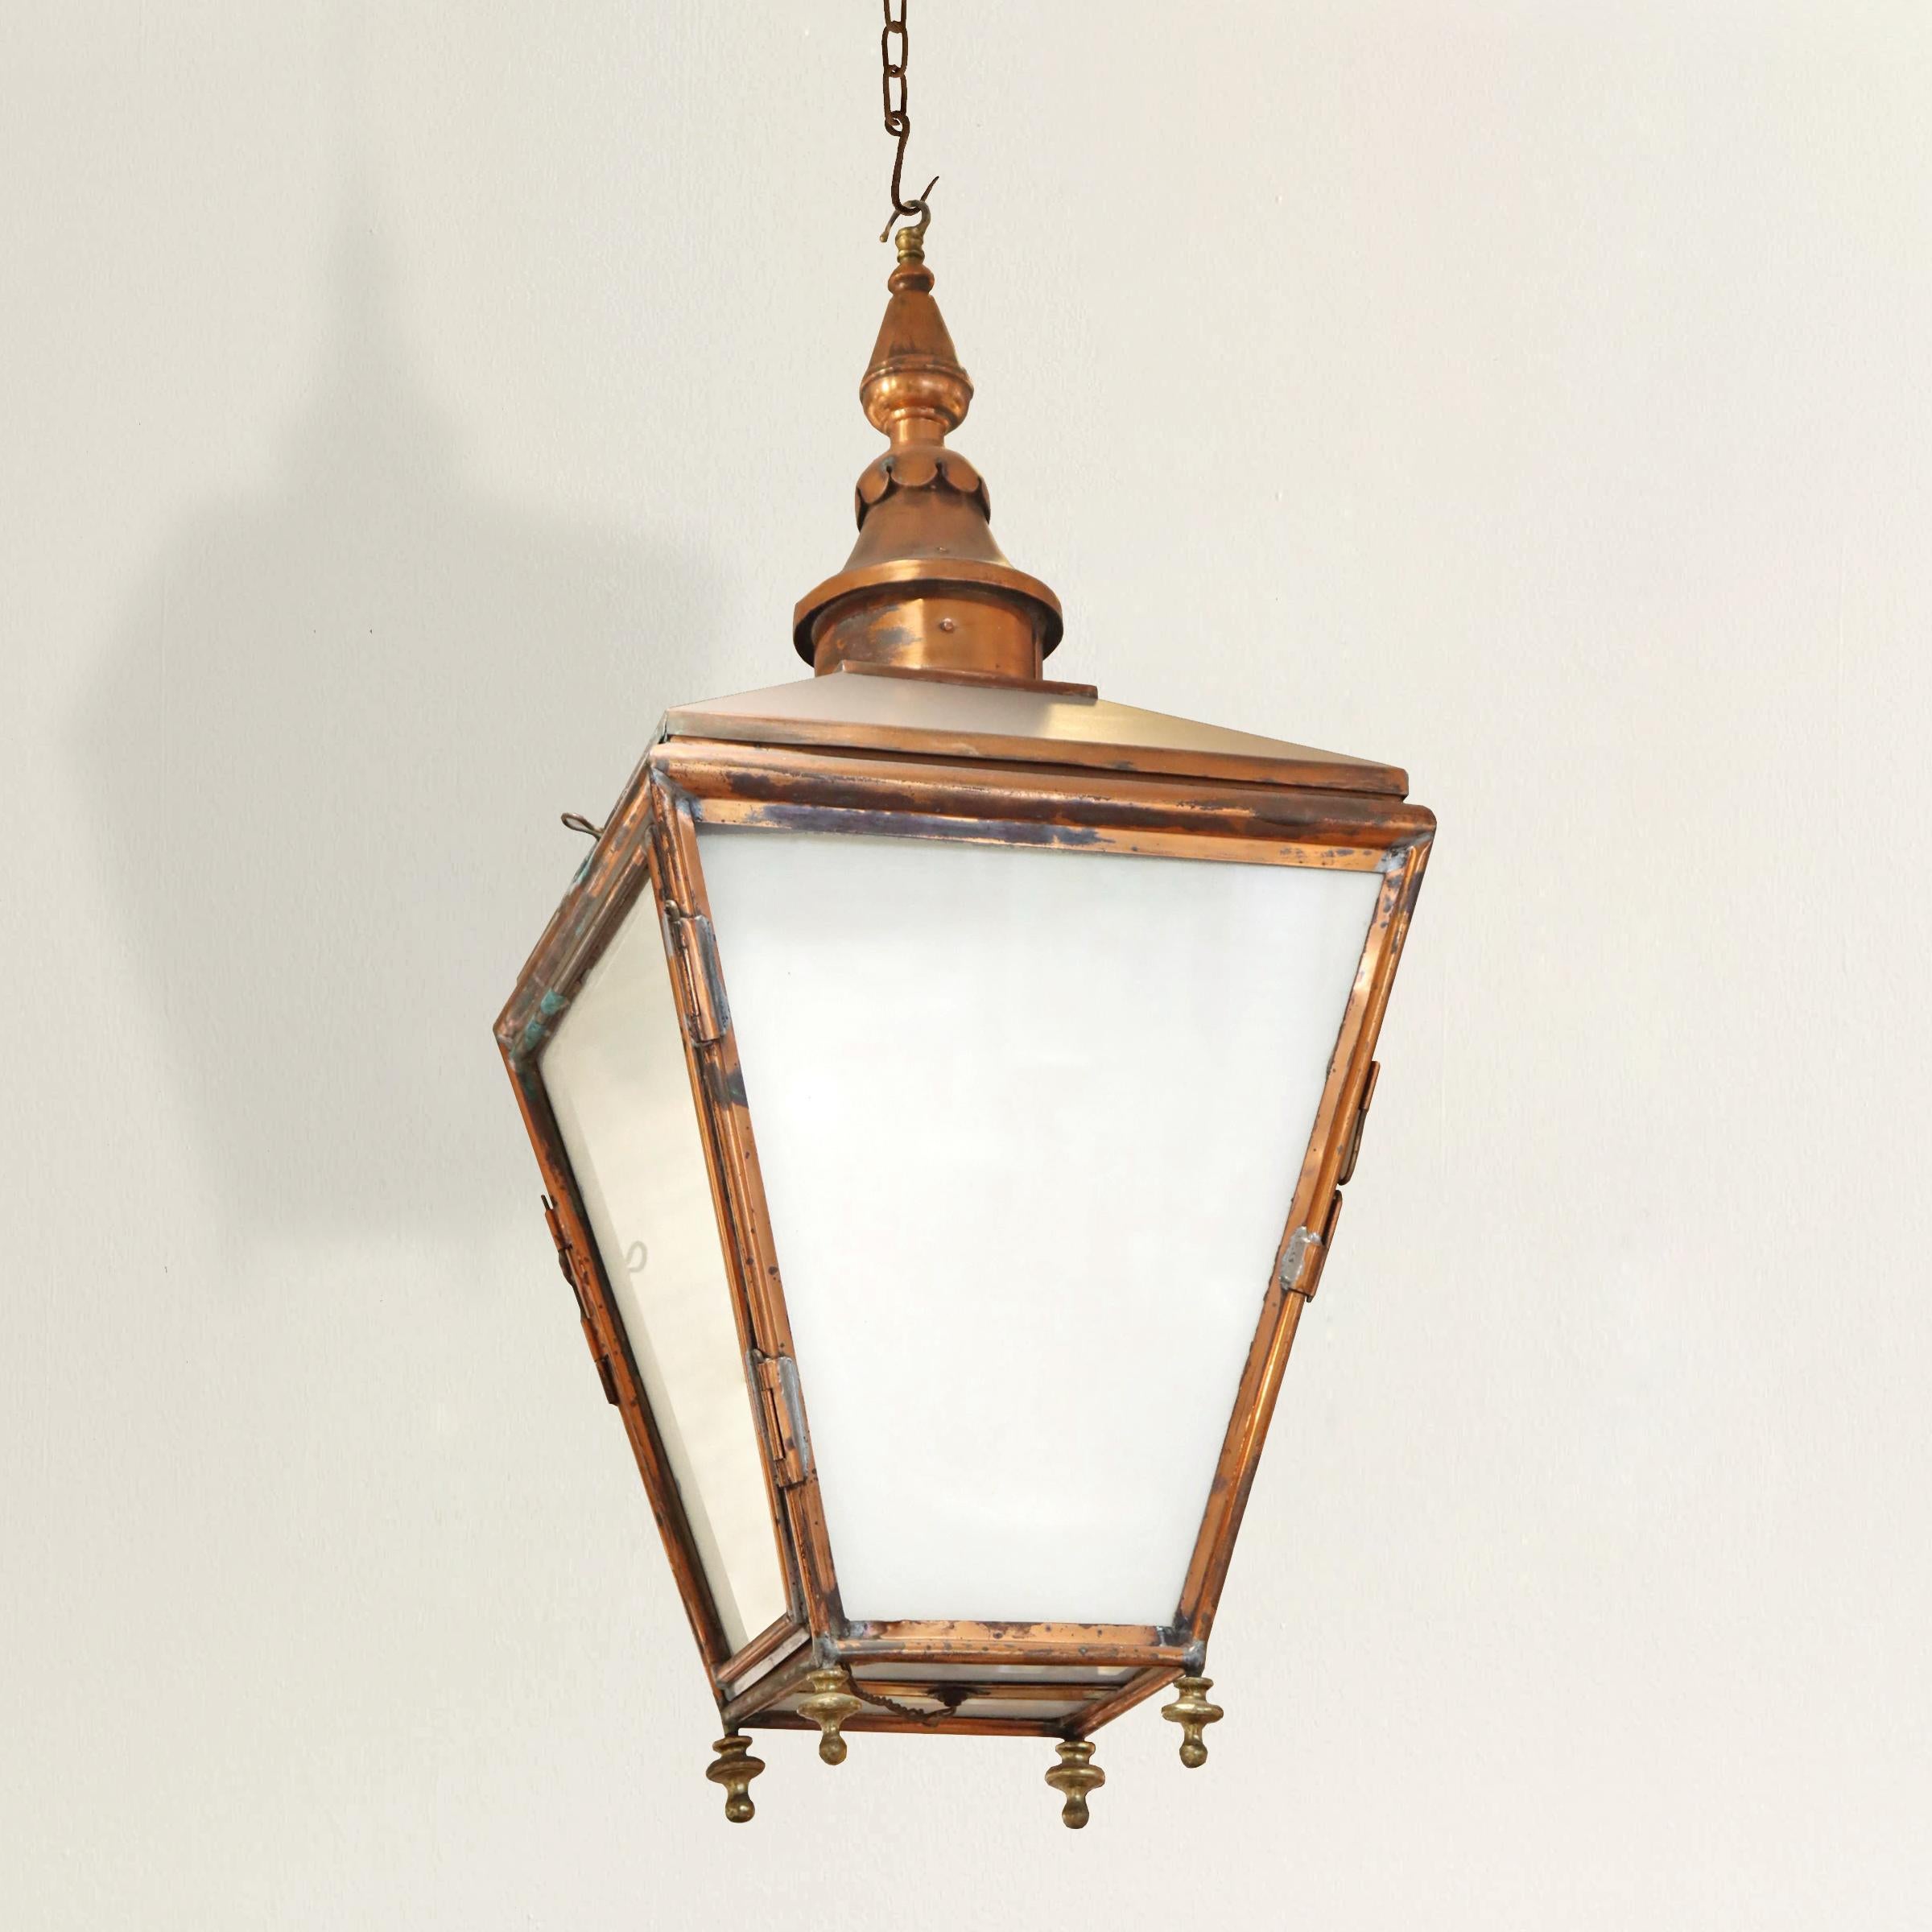 A charming 19th century French copper lantern with tapered side with milk glass, two of which open up, a turned finial top, and turned brass finials on the bottom. Electrified for US; requires a single medium base bulb. No canopy.